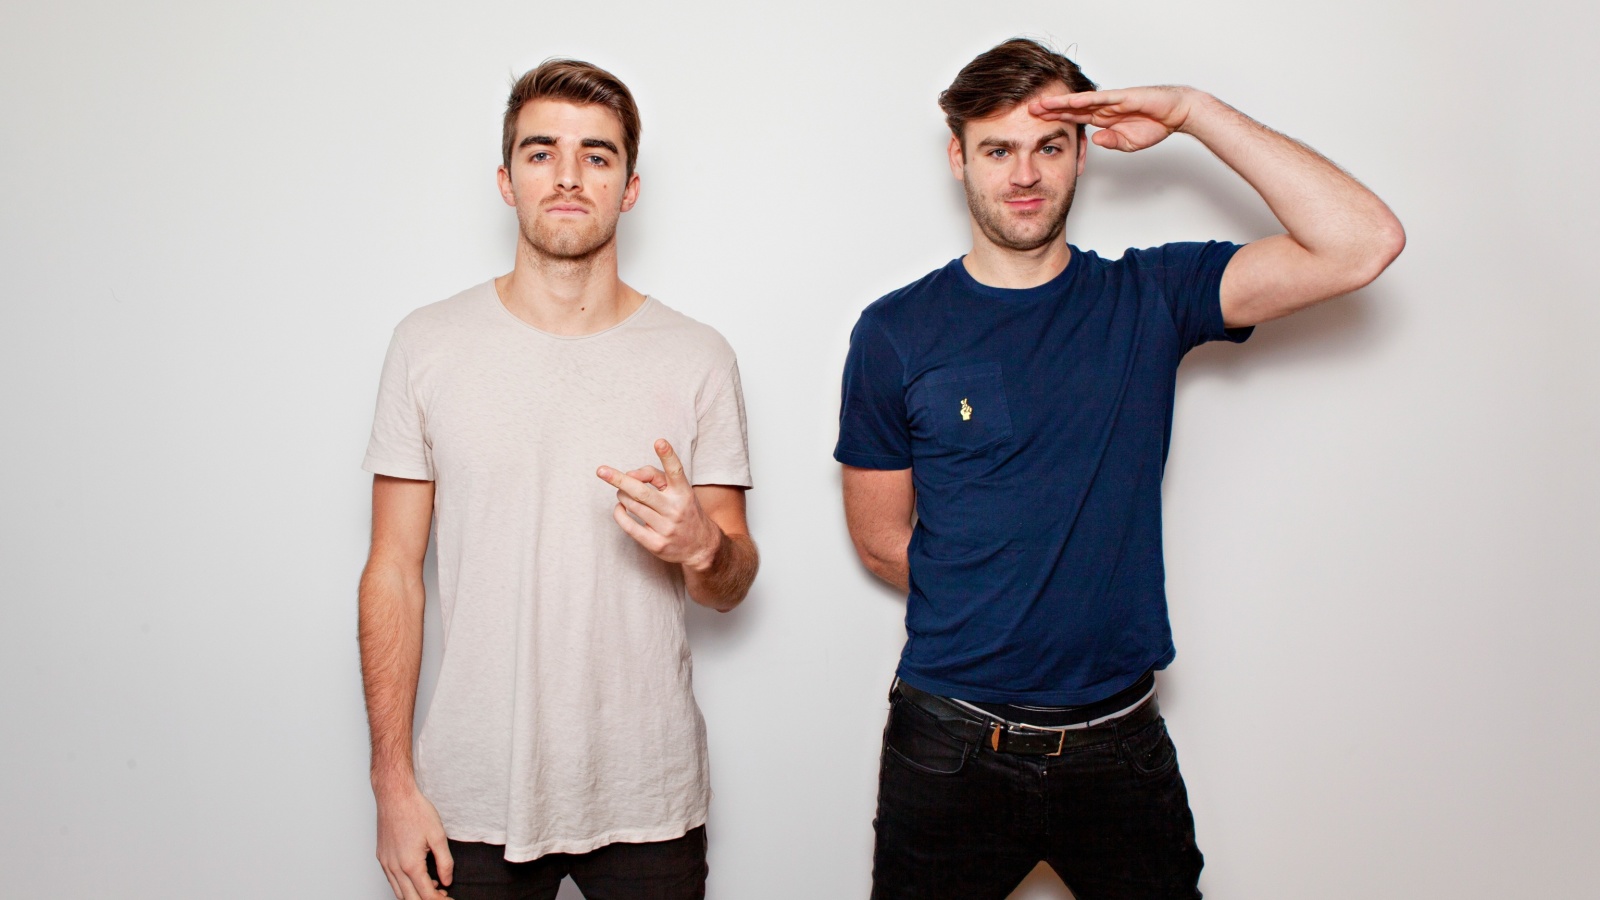 The Chainsmokers with Andrew Taggart and Alex Pall wallpaper 1600x900